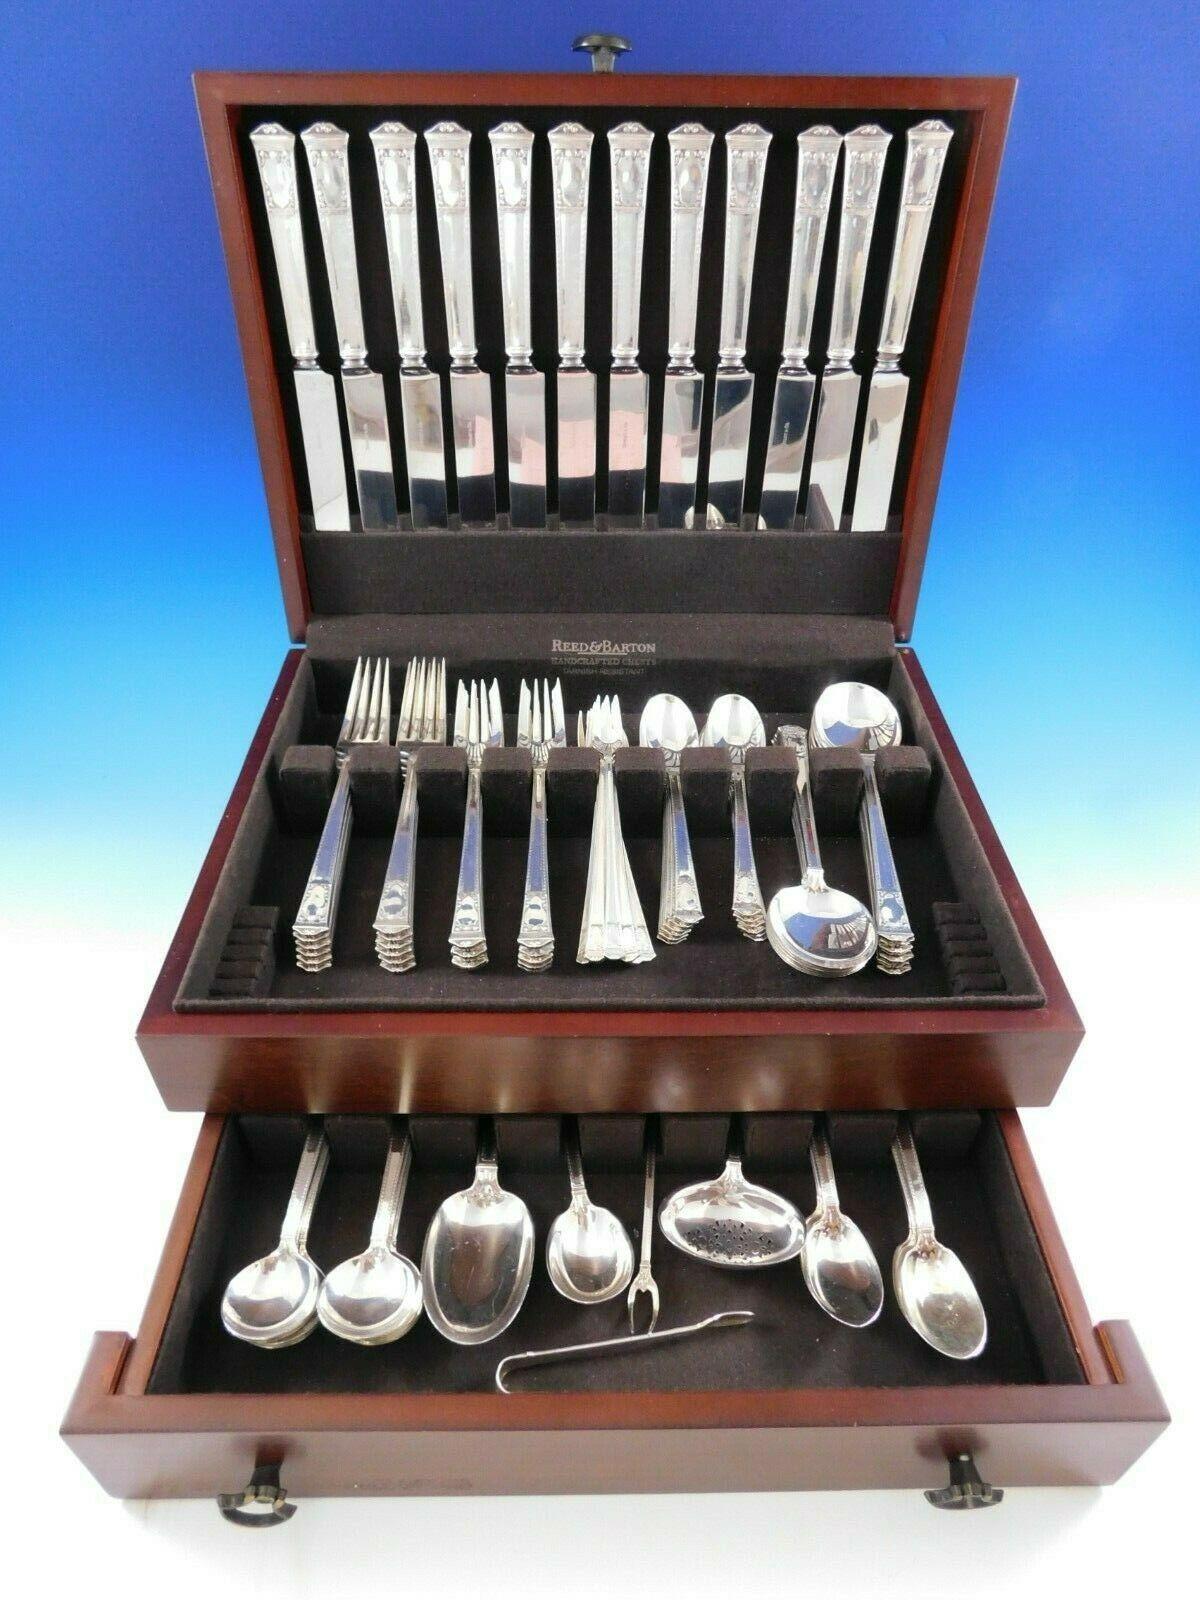 Designed with an eye for balance and proportion, each piece of Tiffany & Co. flatware is a masterpiece of form and function. SAN LORENZO (c. 1916) San Lorenzo was introduced by Tiffany & Co. in 1916. Named for Florence's Church of San Lorenzo, its